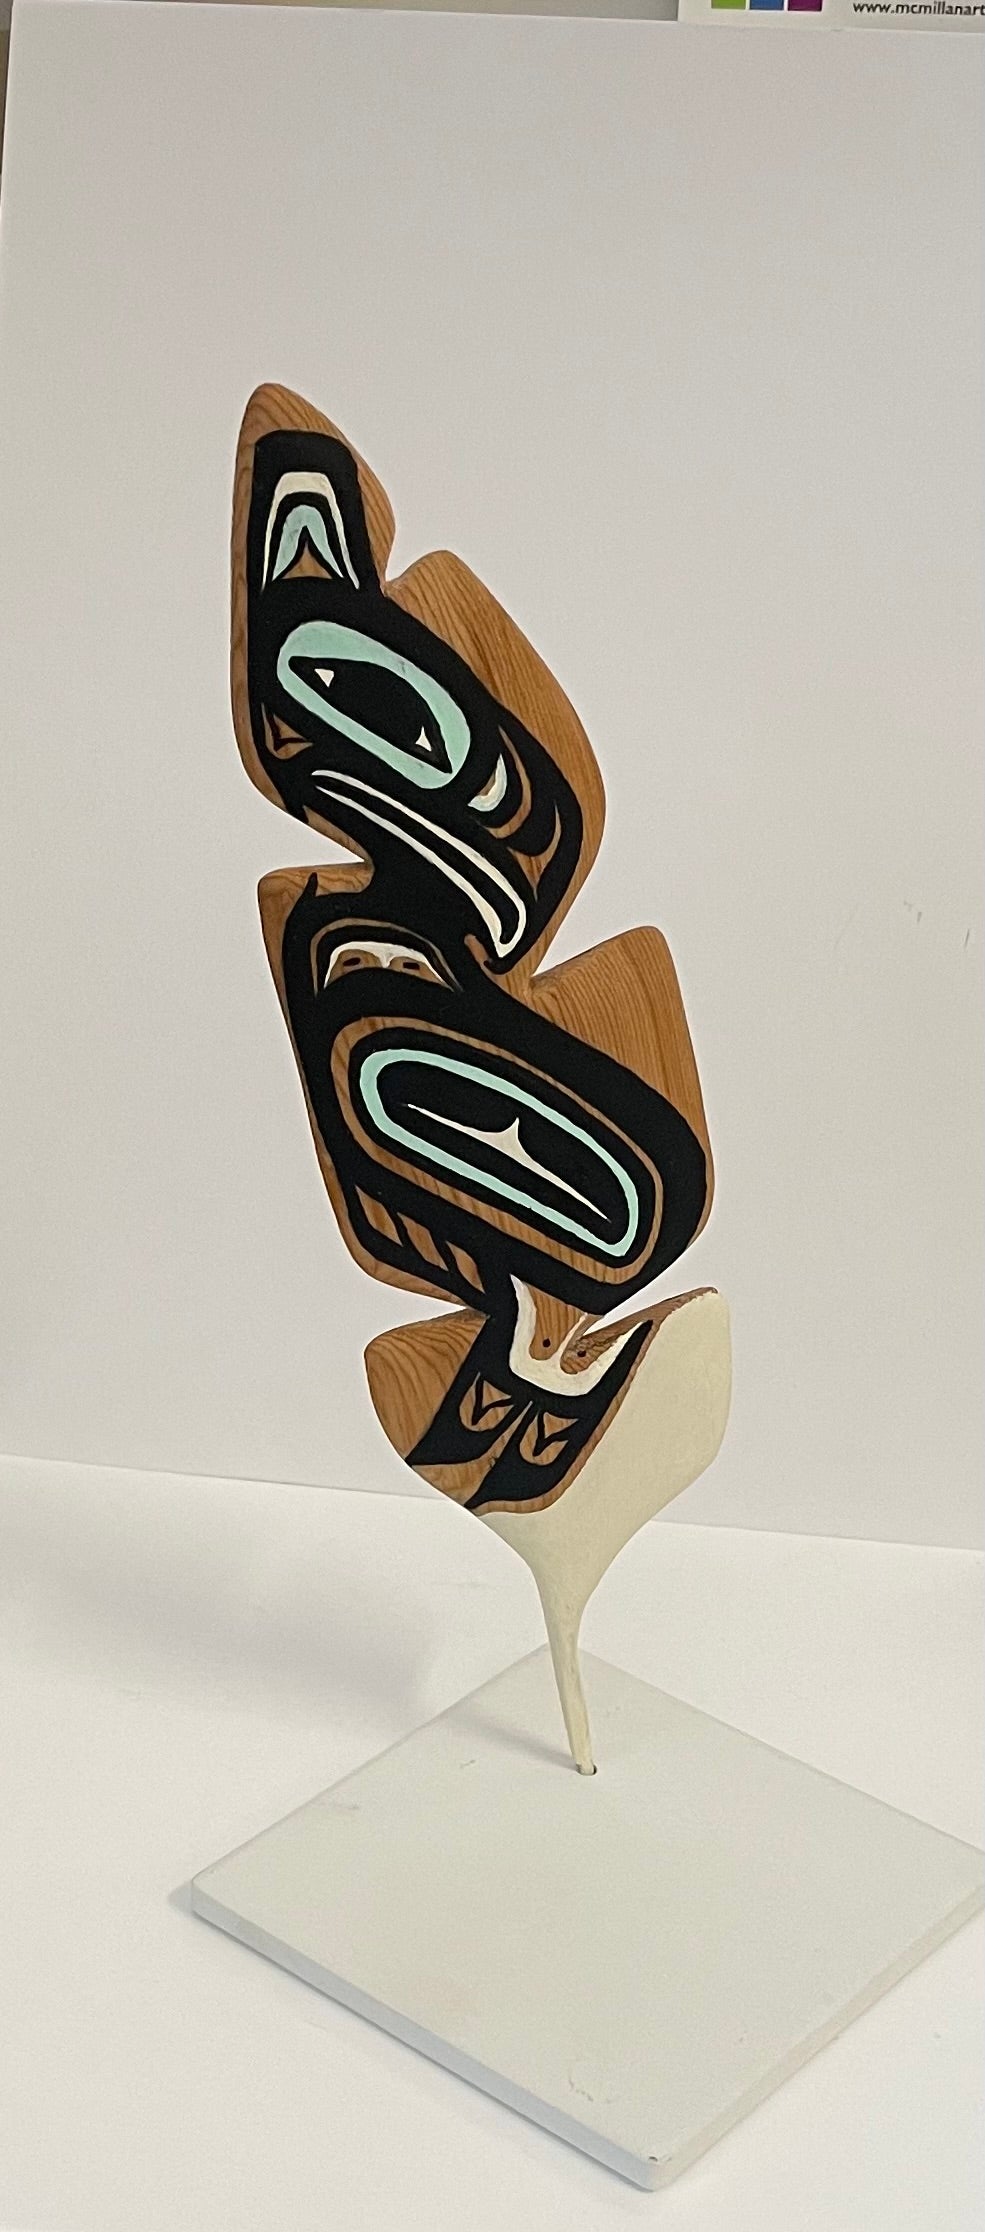 Mike Bellis - Carving - Black, White & Teal Eagle Feather with base - Mike Bellis - McMillan Arts Centre Gallery, Gift Shop and Box Office - Vancouver Island Art Gallery